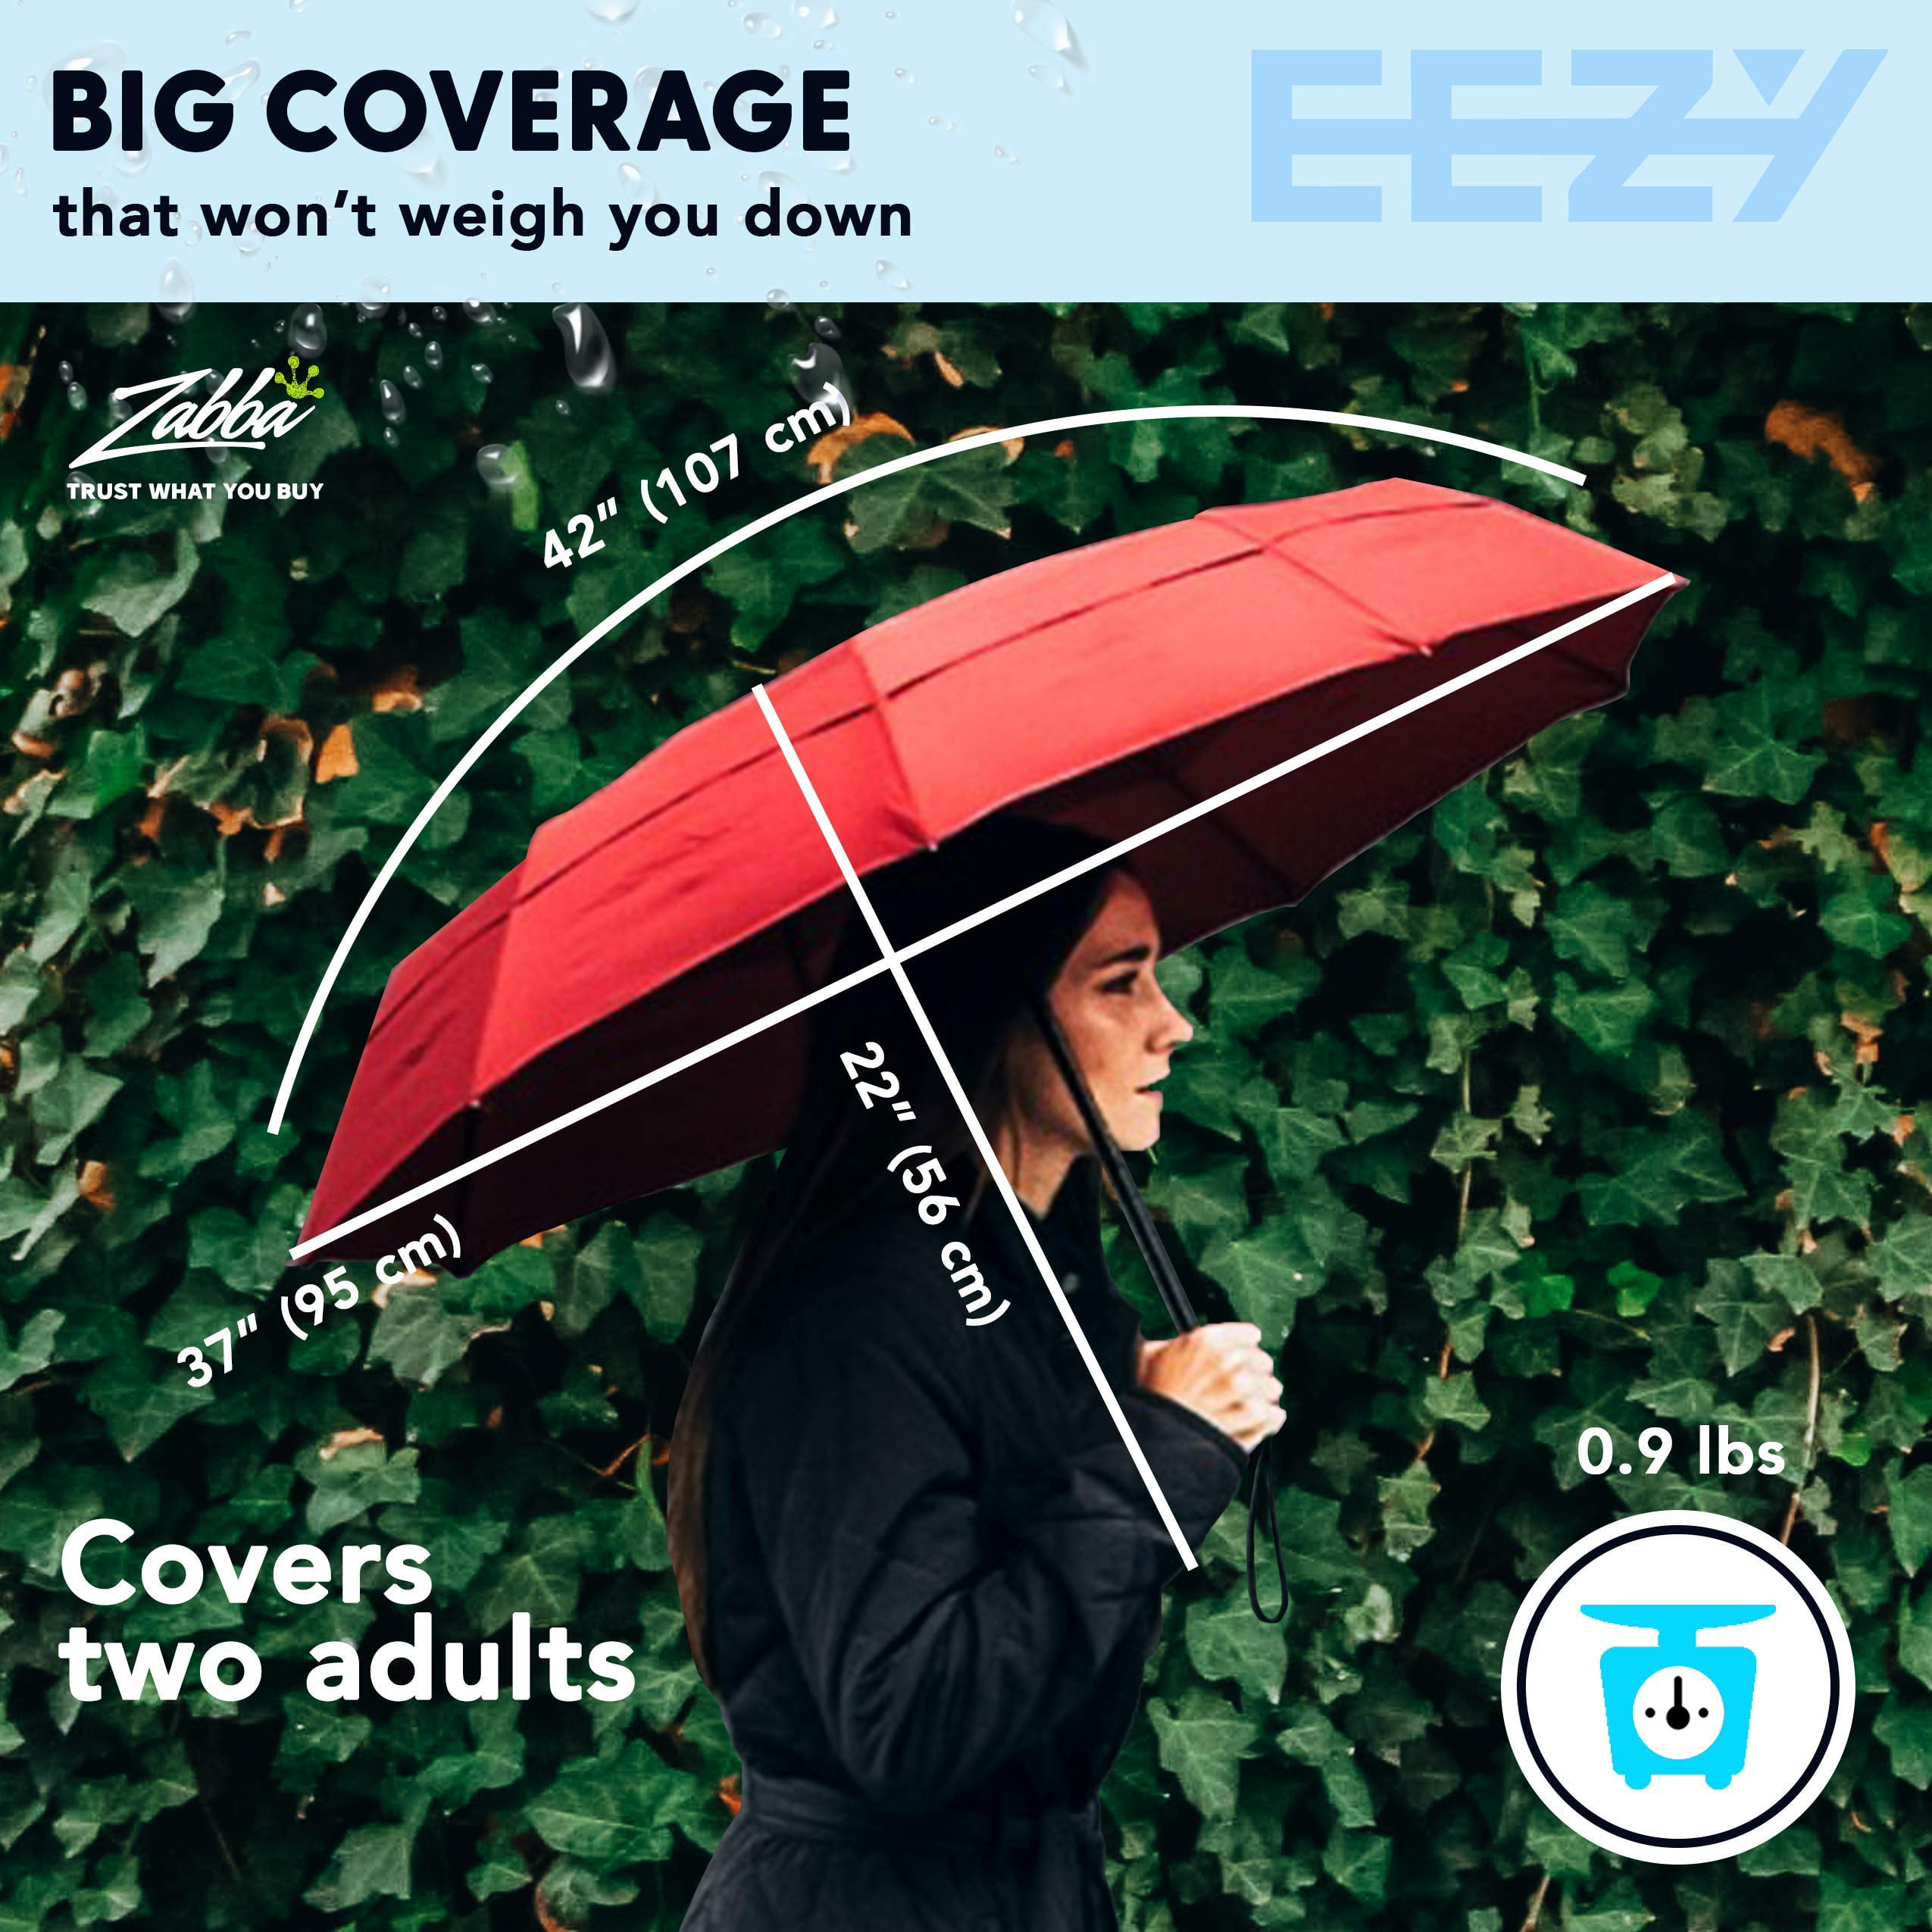 Sturdy Lifetime Guarantee EEZ-Y Compact Travel Umbrella with Windproof Double Canopy Construction Portable and Lightweight for Easy Carrying Auto Open Close Button for One Handed Operation